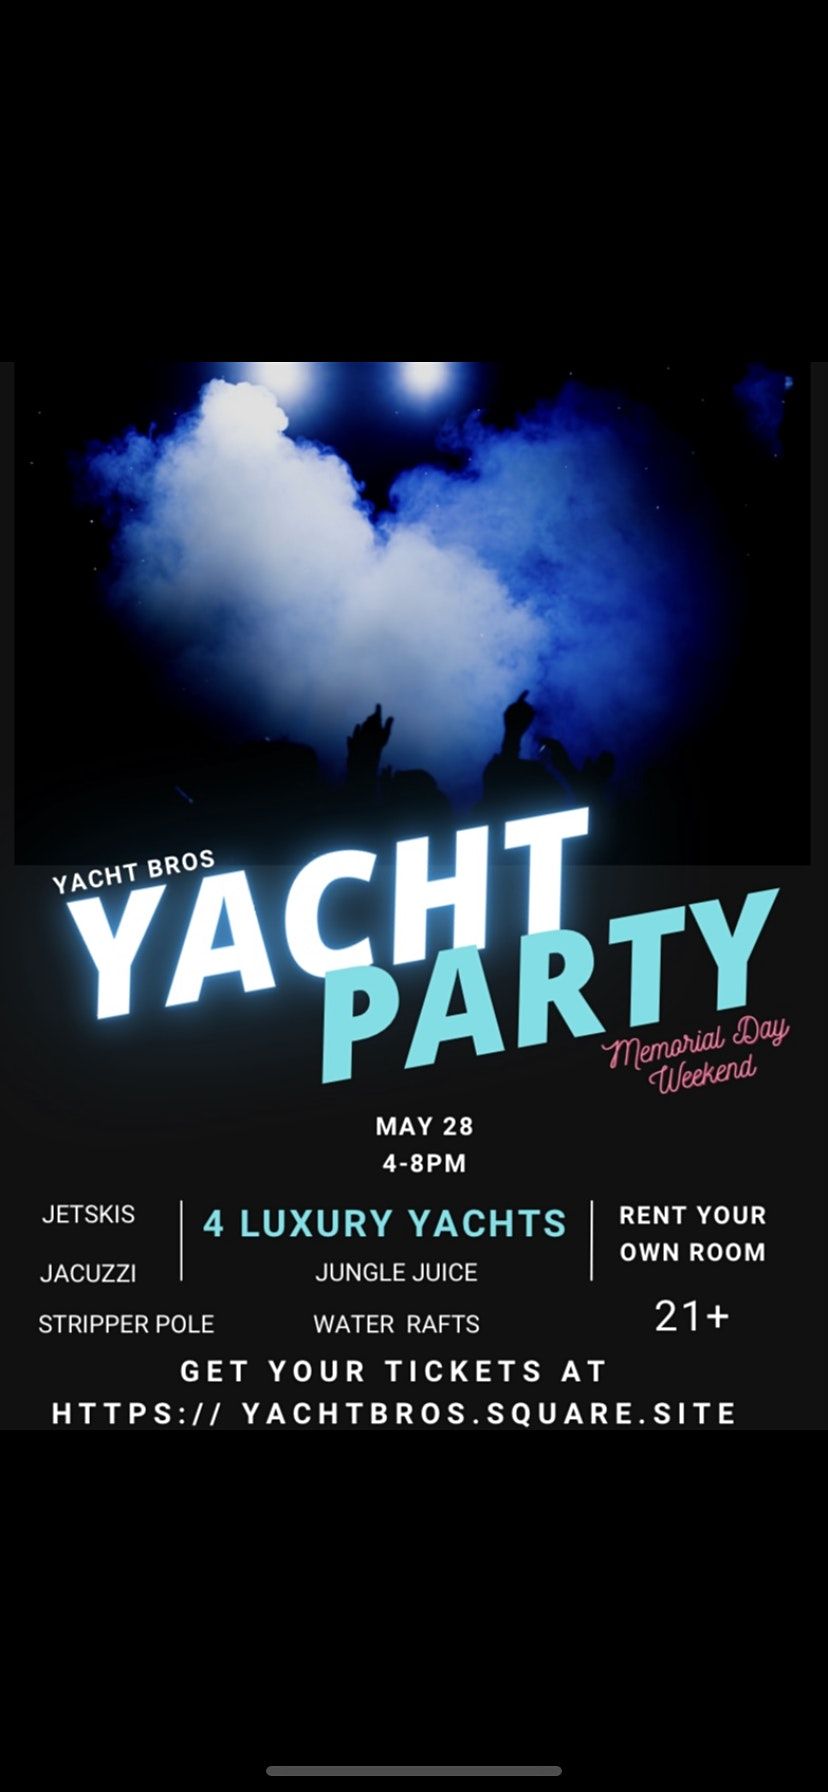 Yacht PARTY-HOSTED BY YACHT BROS***GA